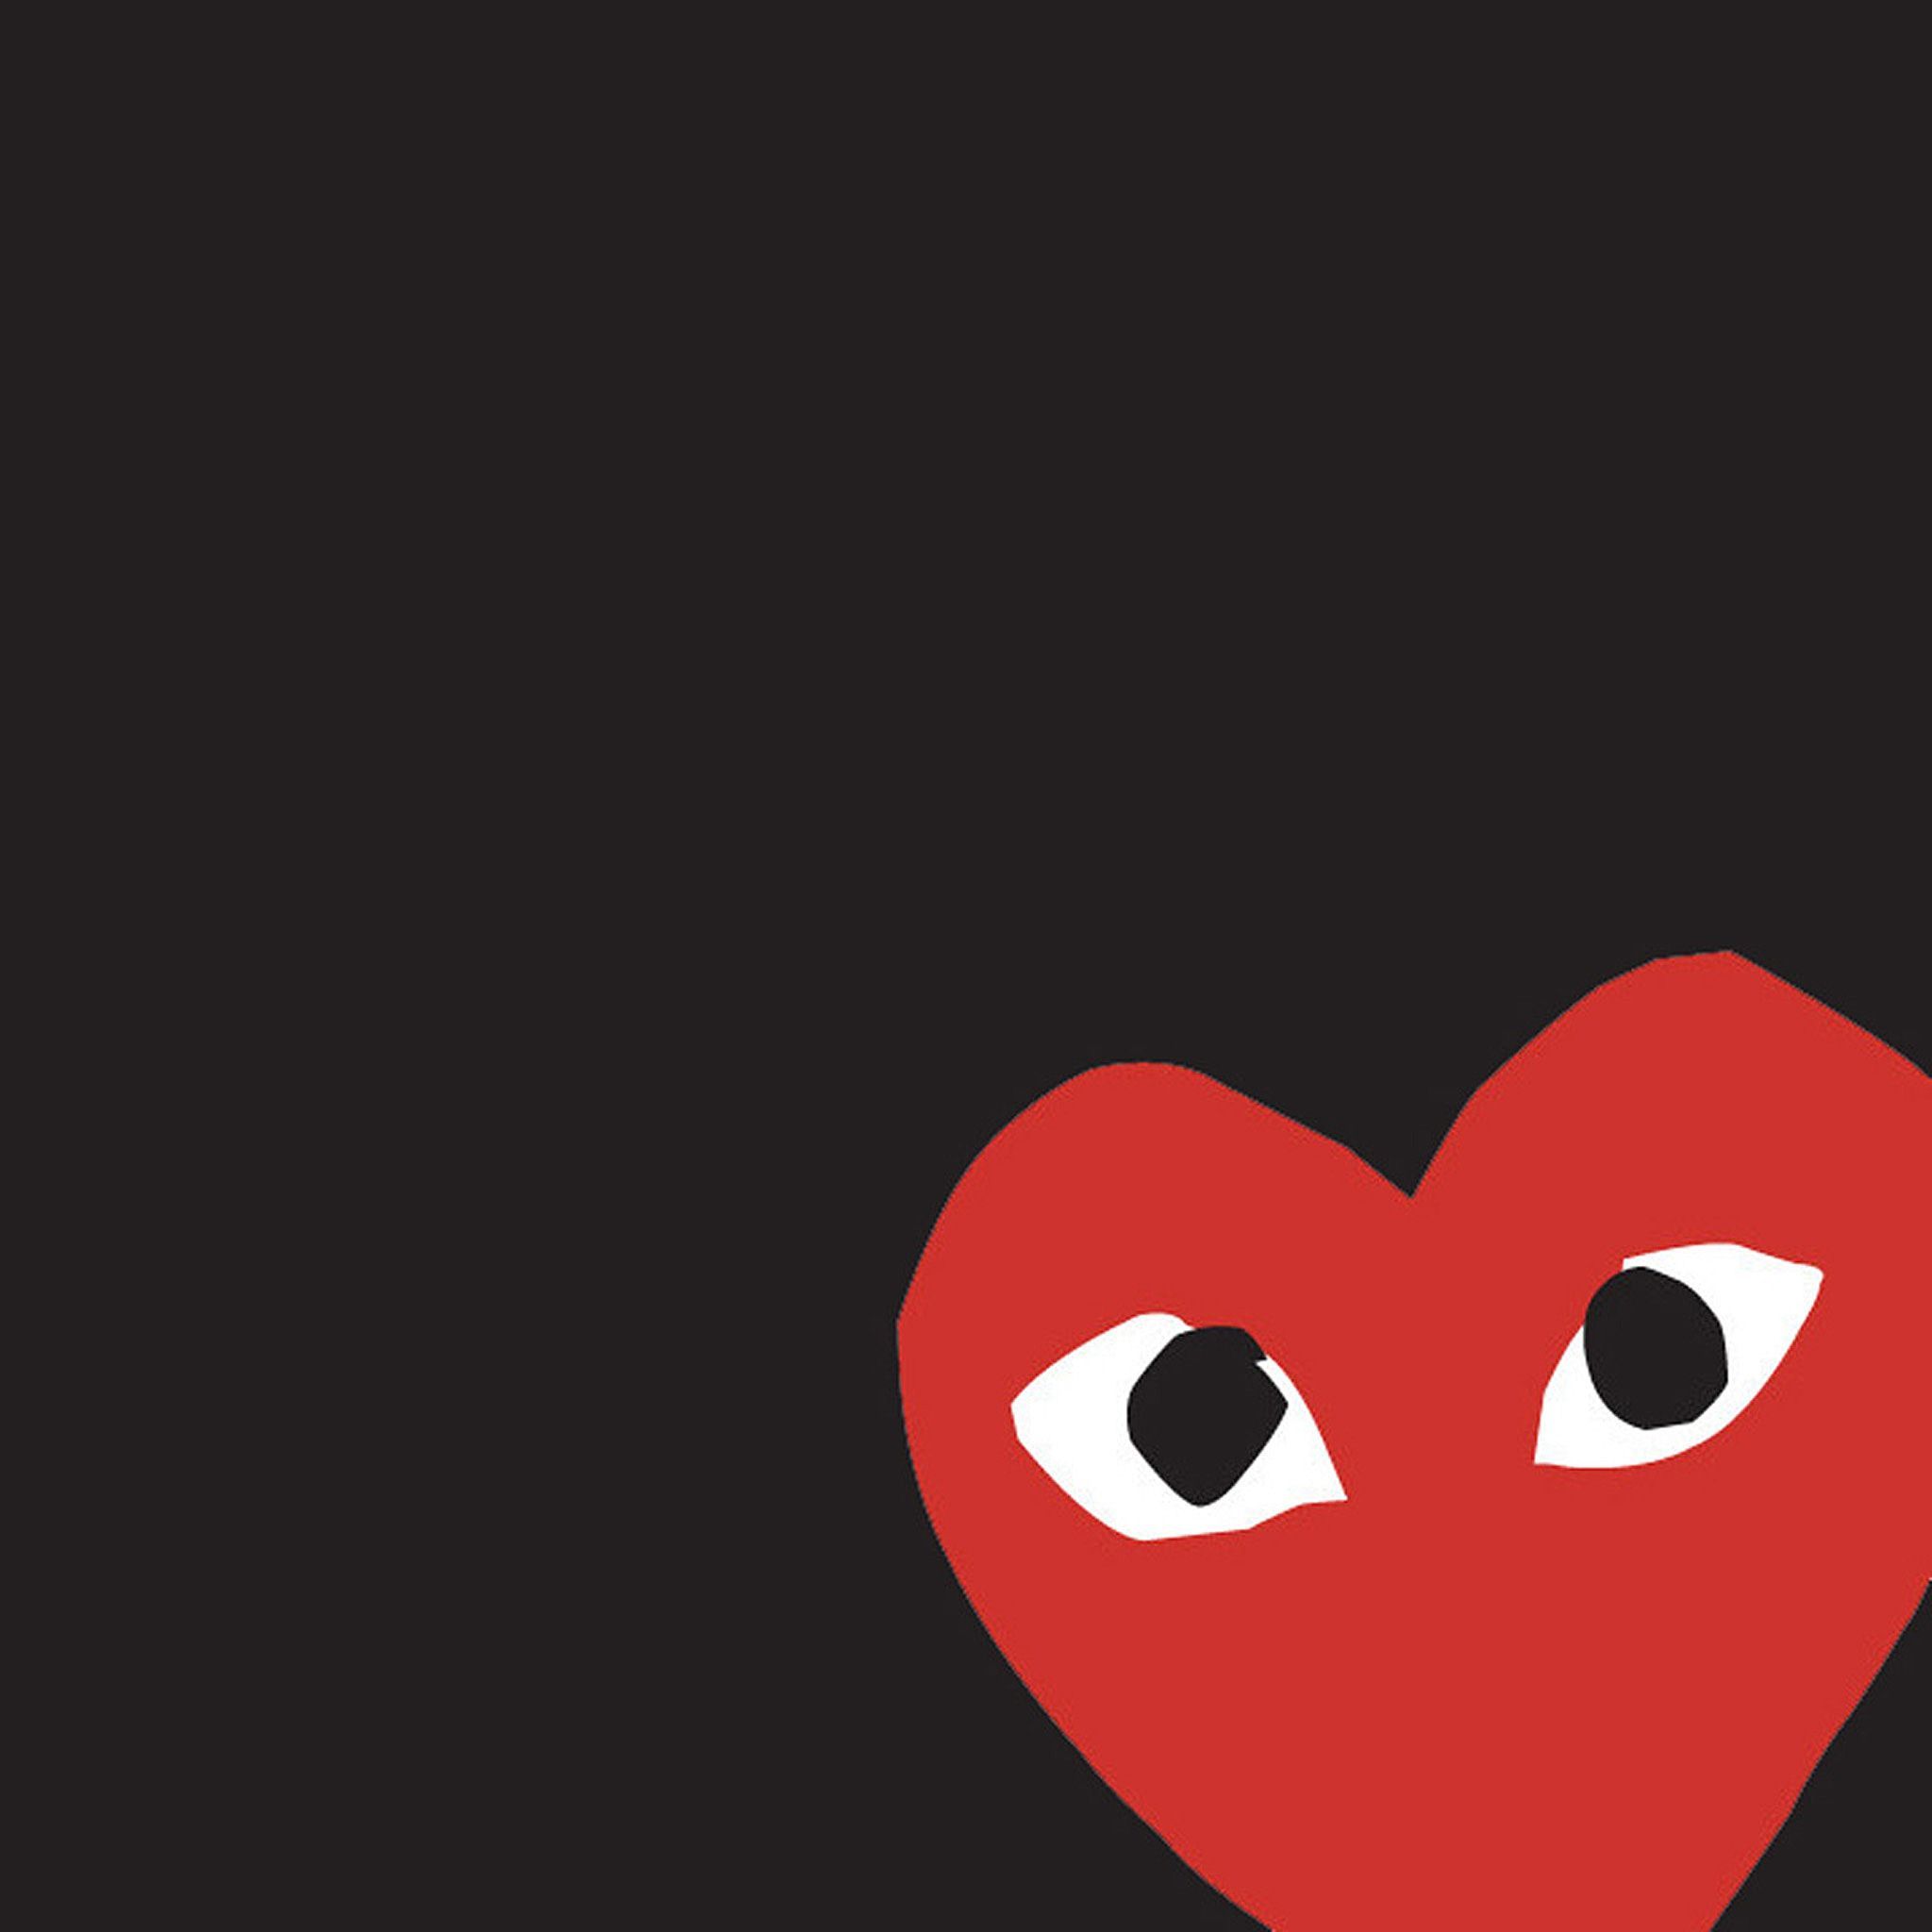 Heart With Eyes Wallpapers - Wallpaper Cave